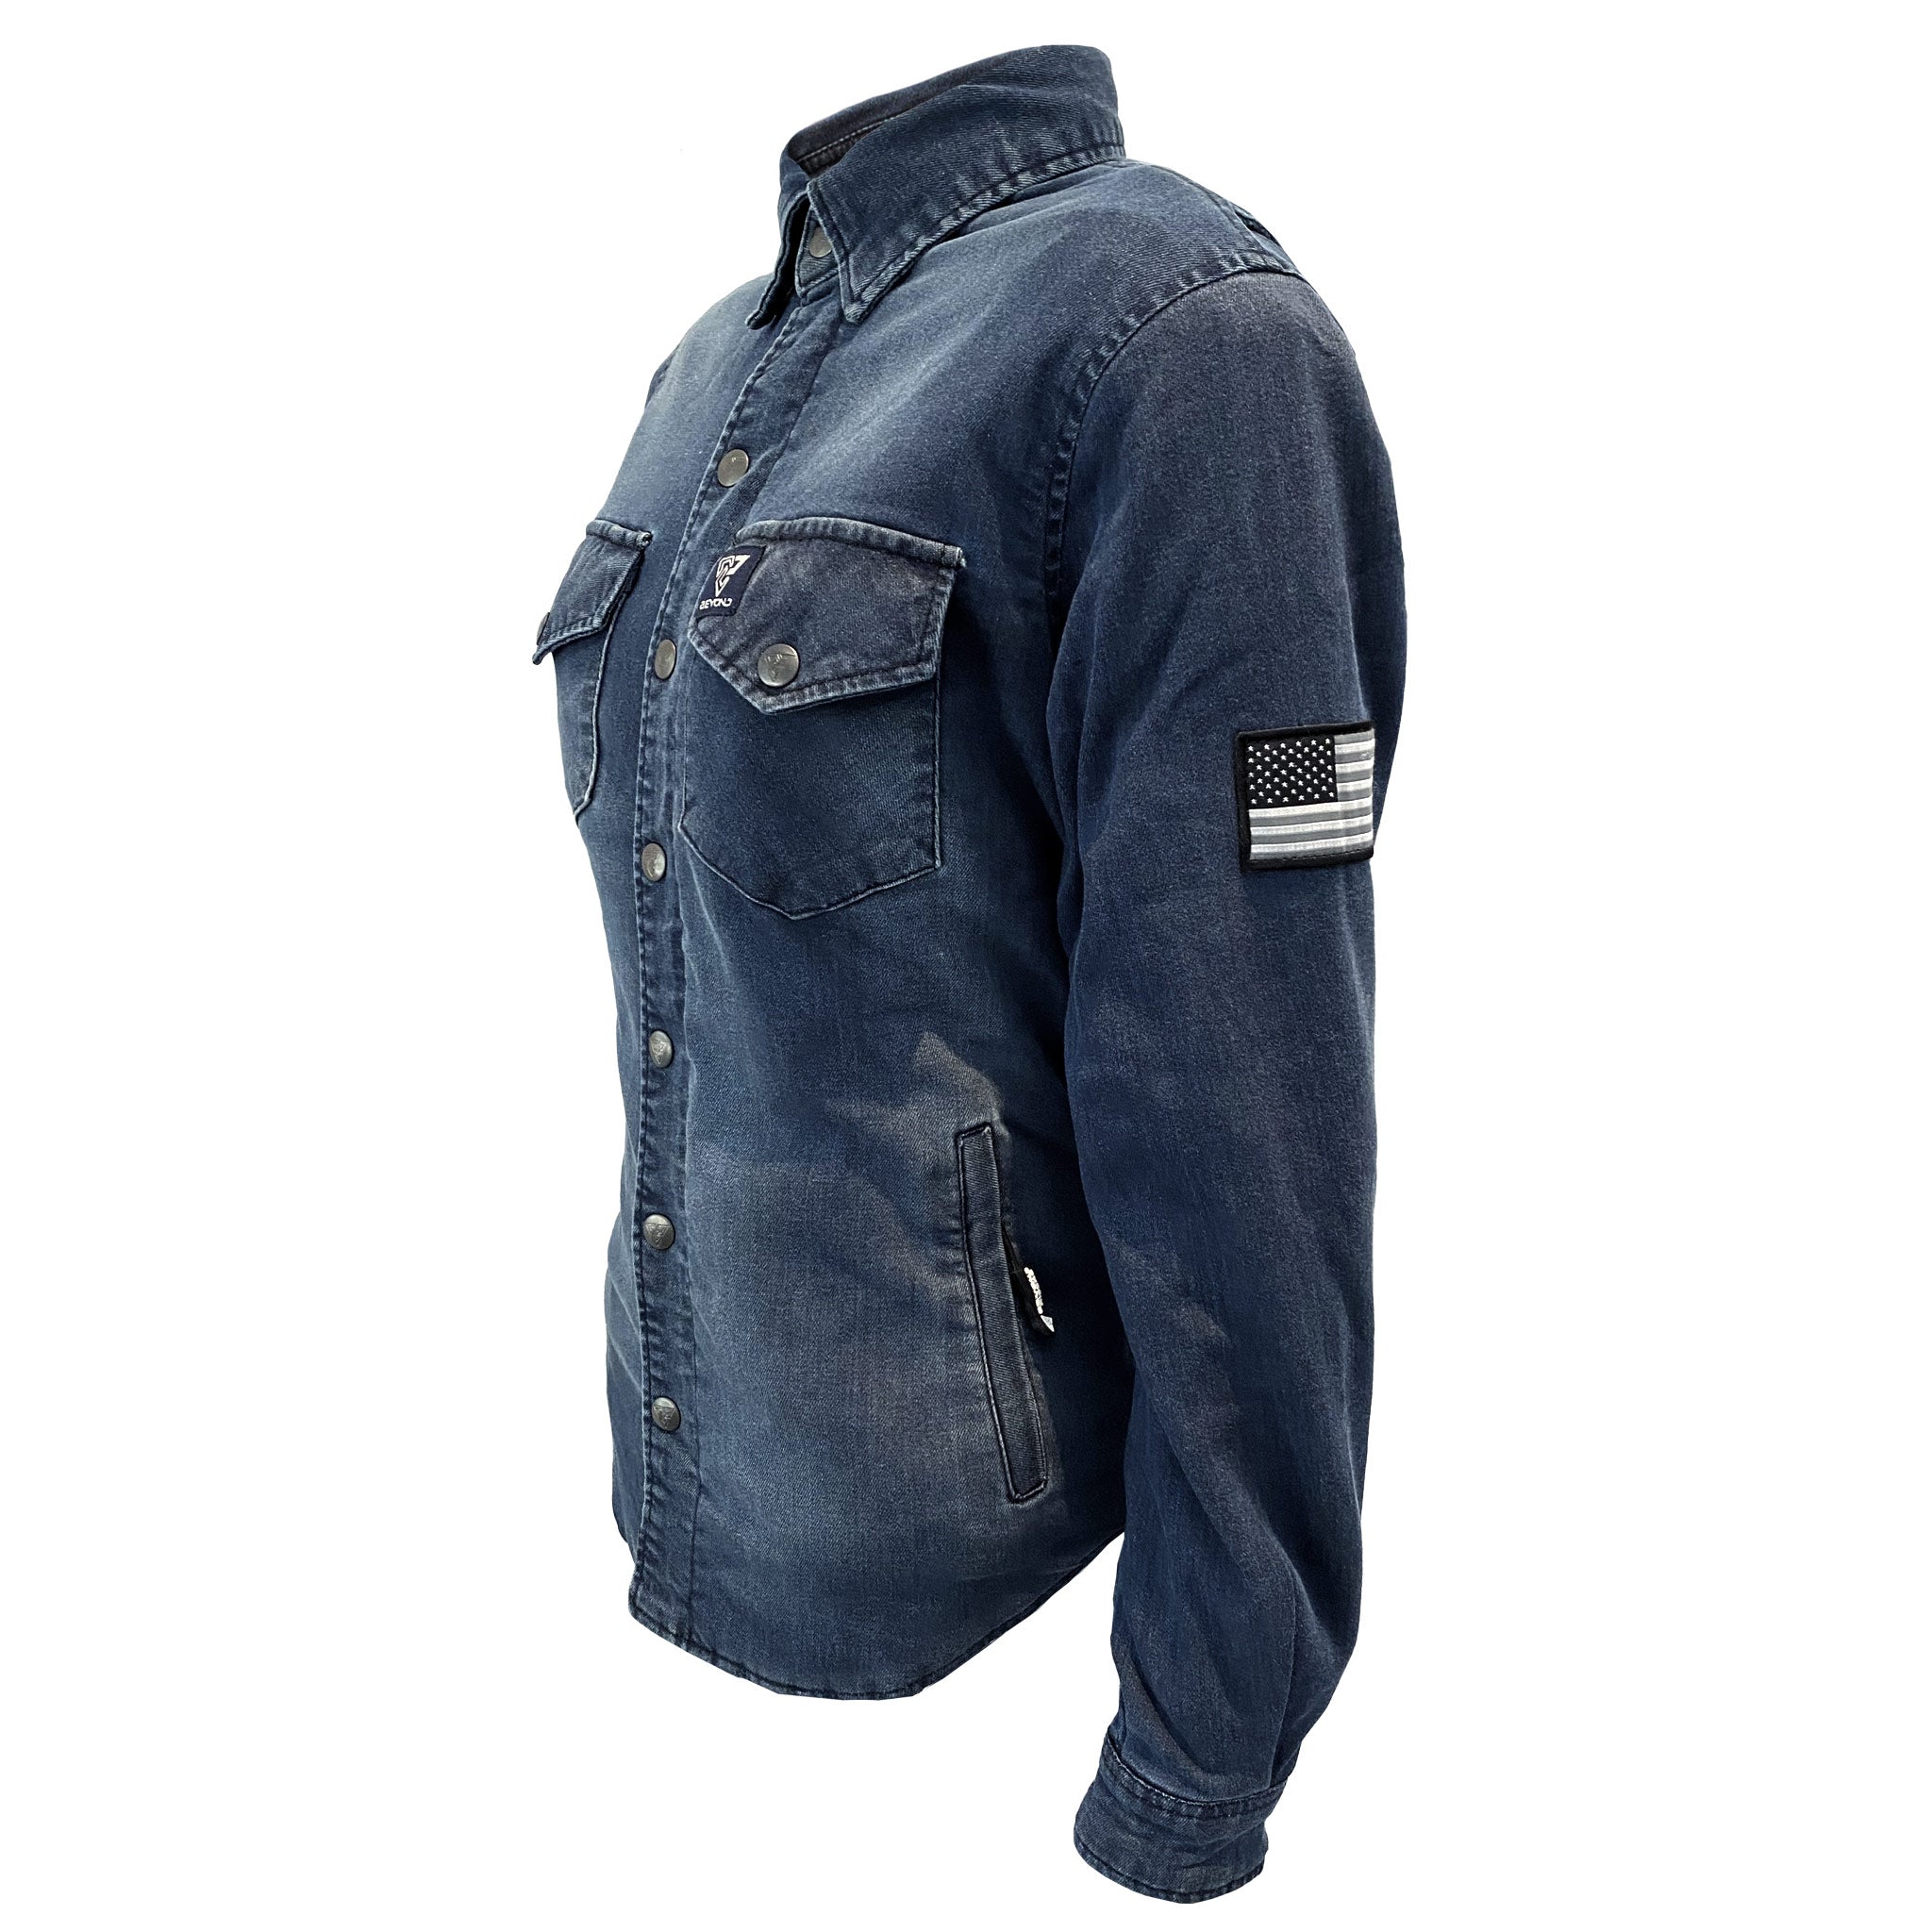 Protective Jeans Jacket for Women - Faded Blue